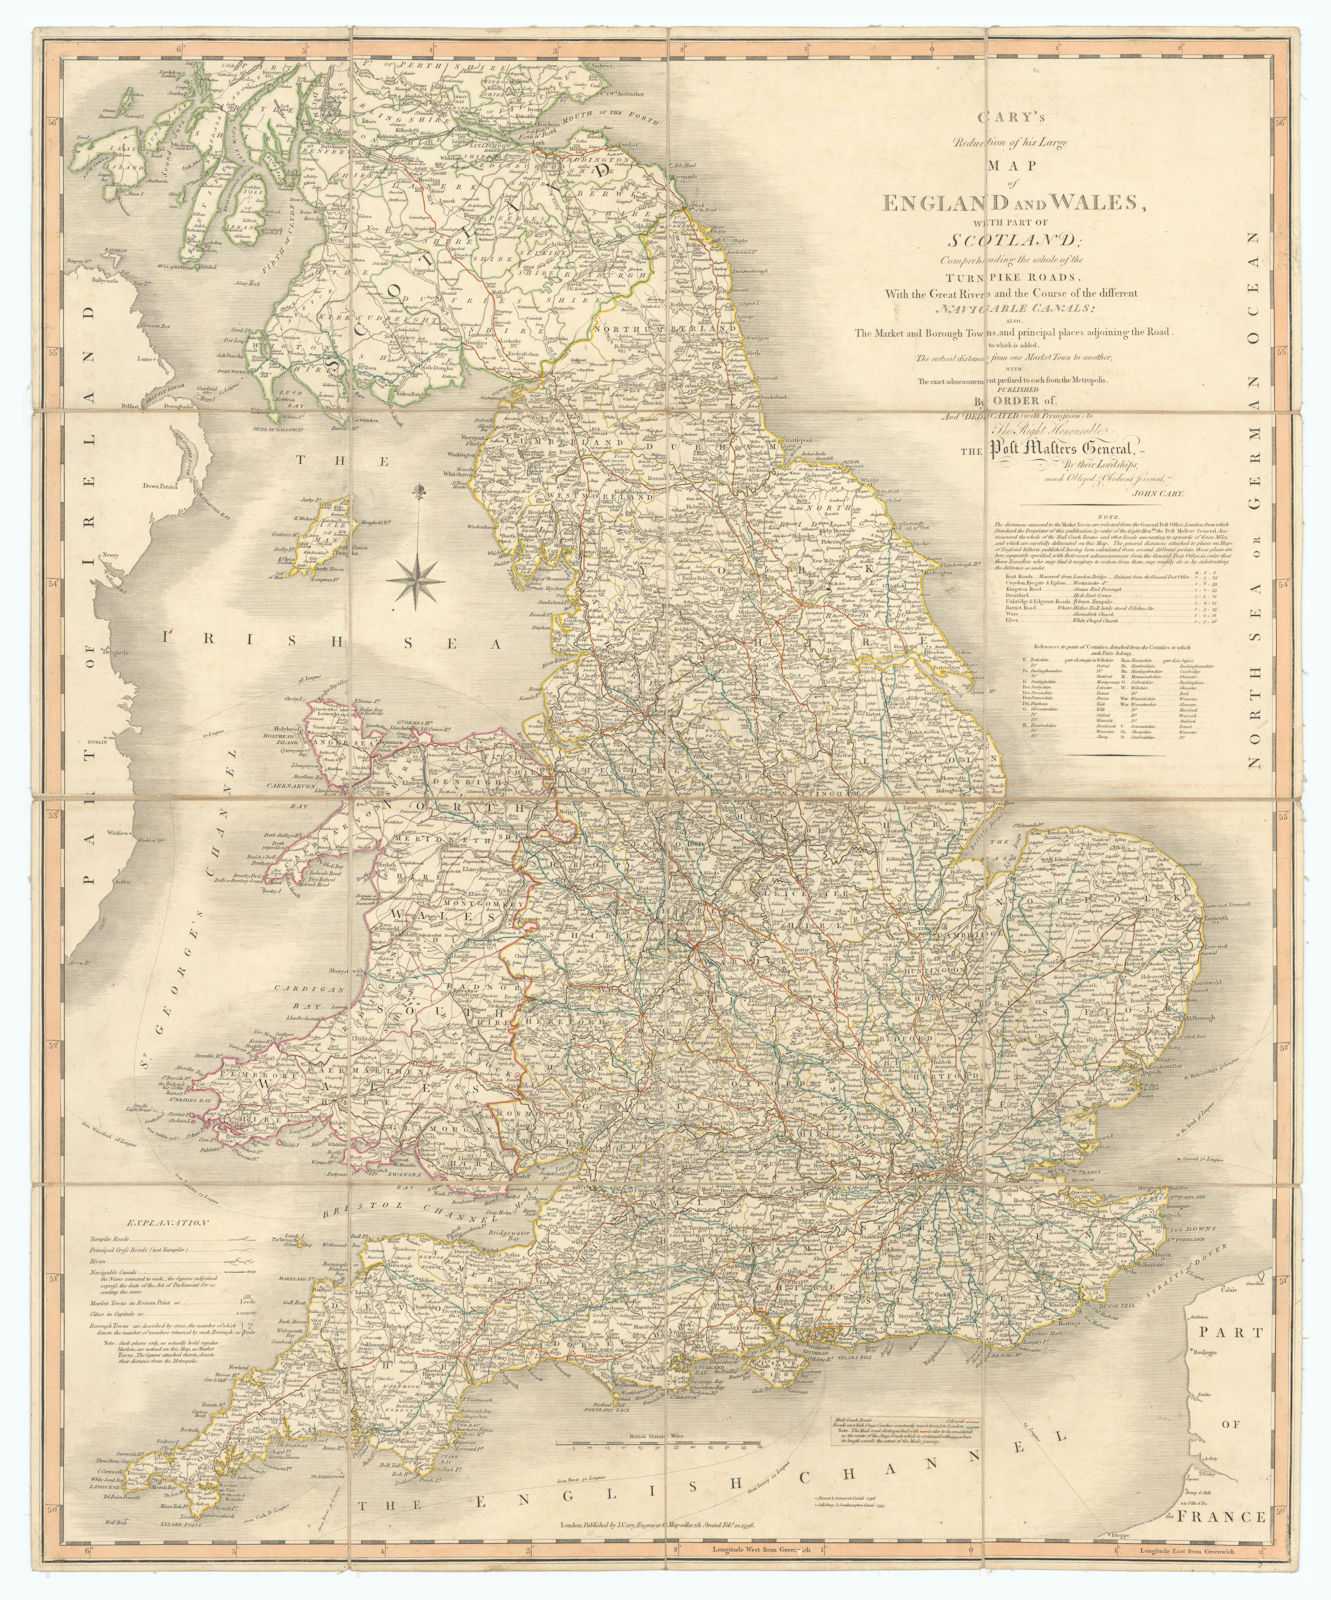 'Cary's reduction of his large map of England & Wales'. Turnpikes canals &c 1796